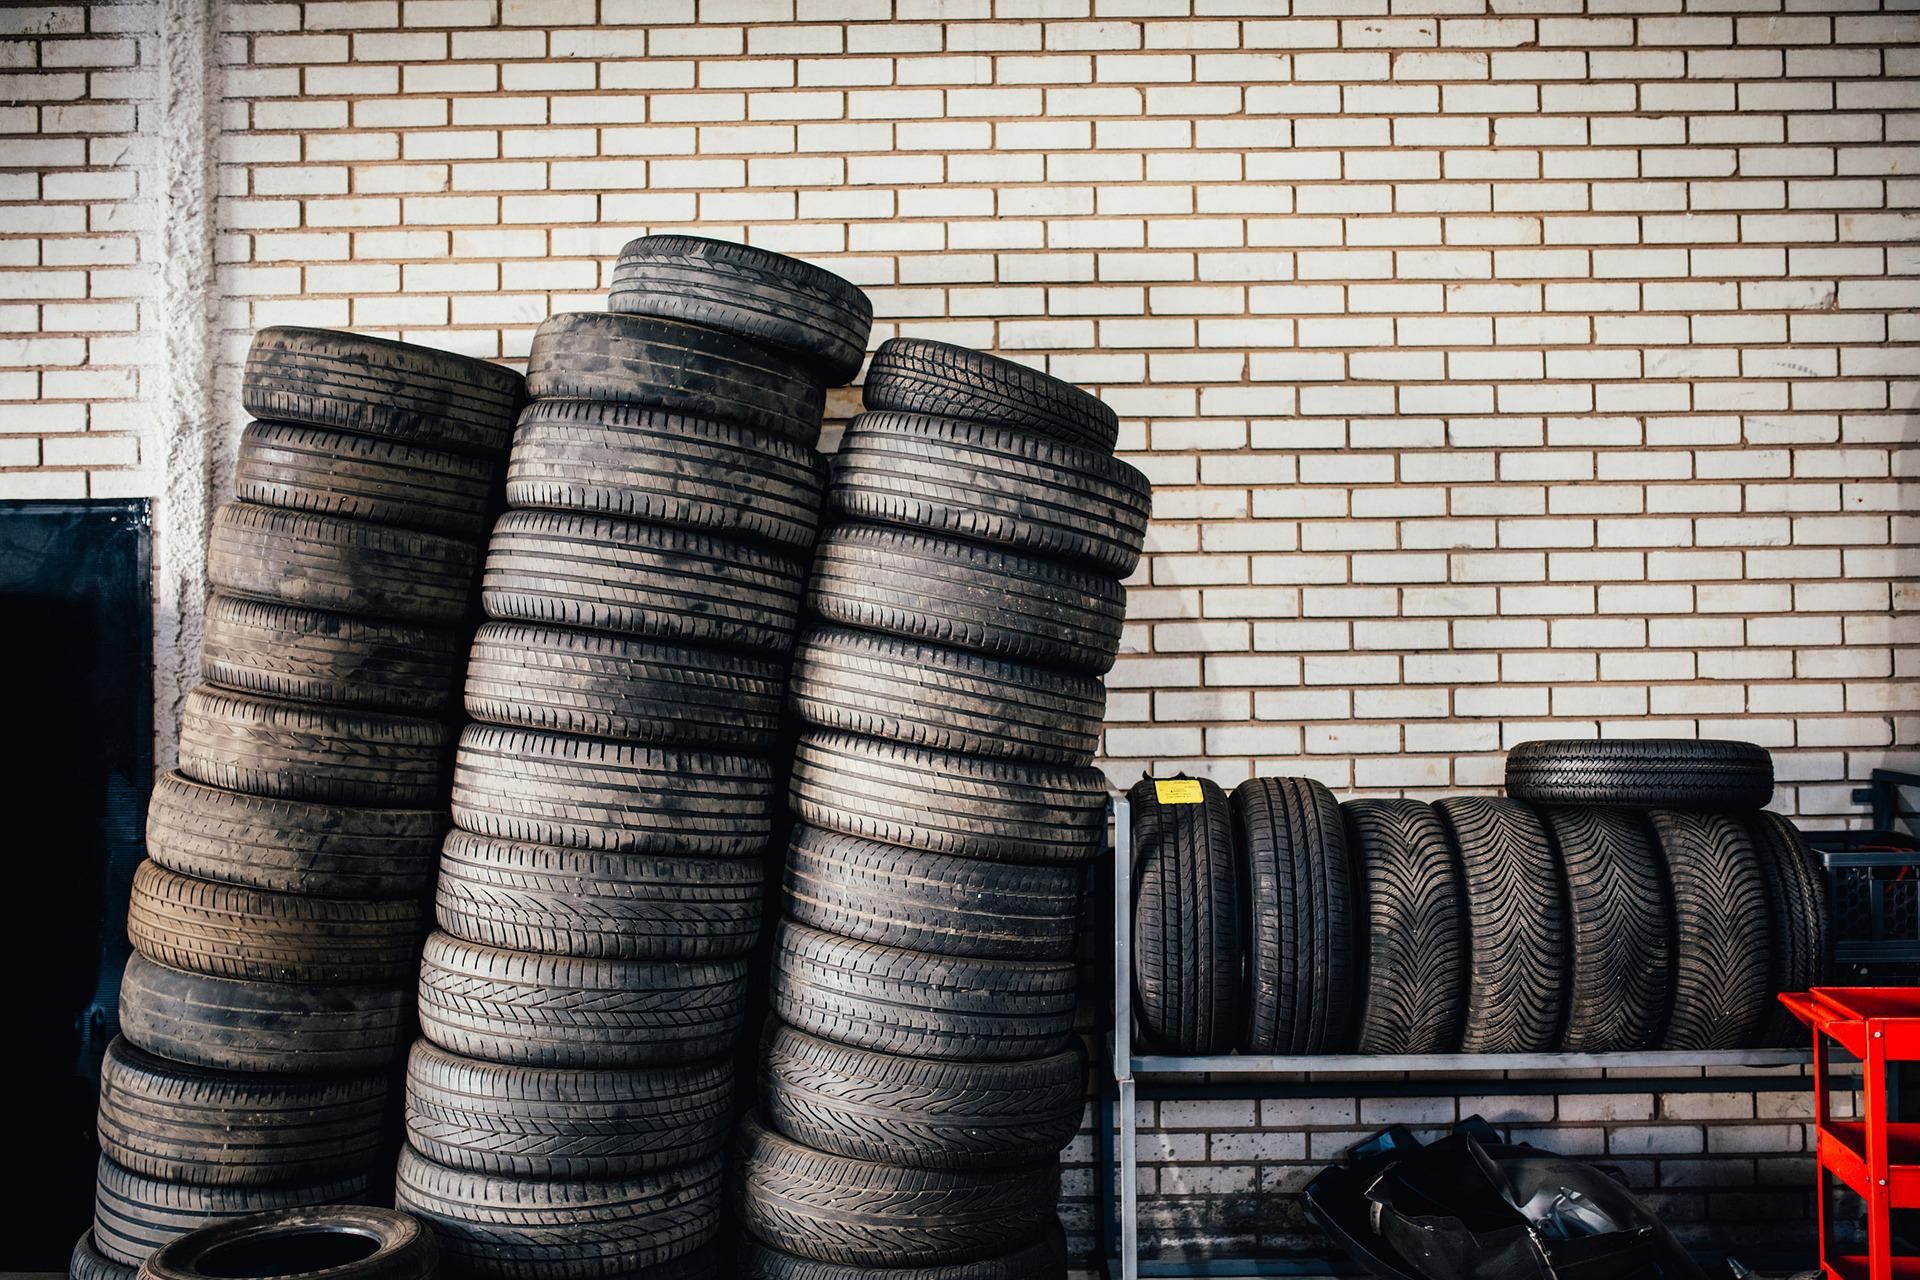 Three stacks of tires against a brick wall background